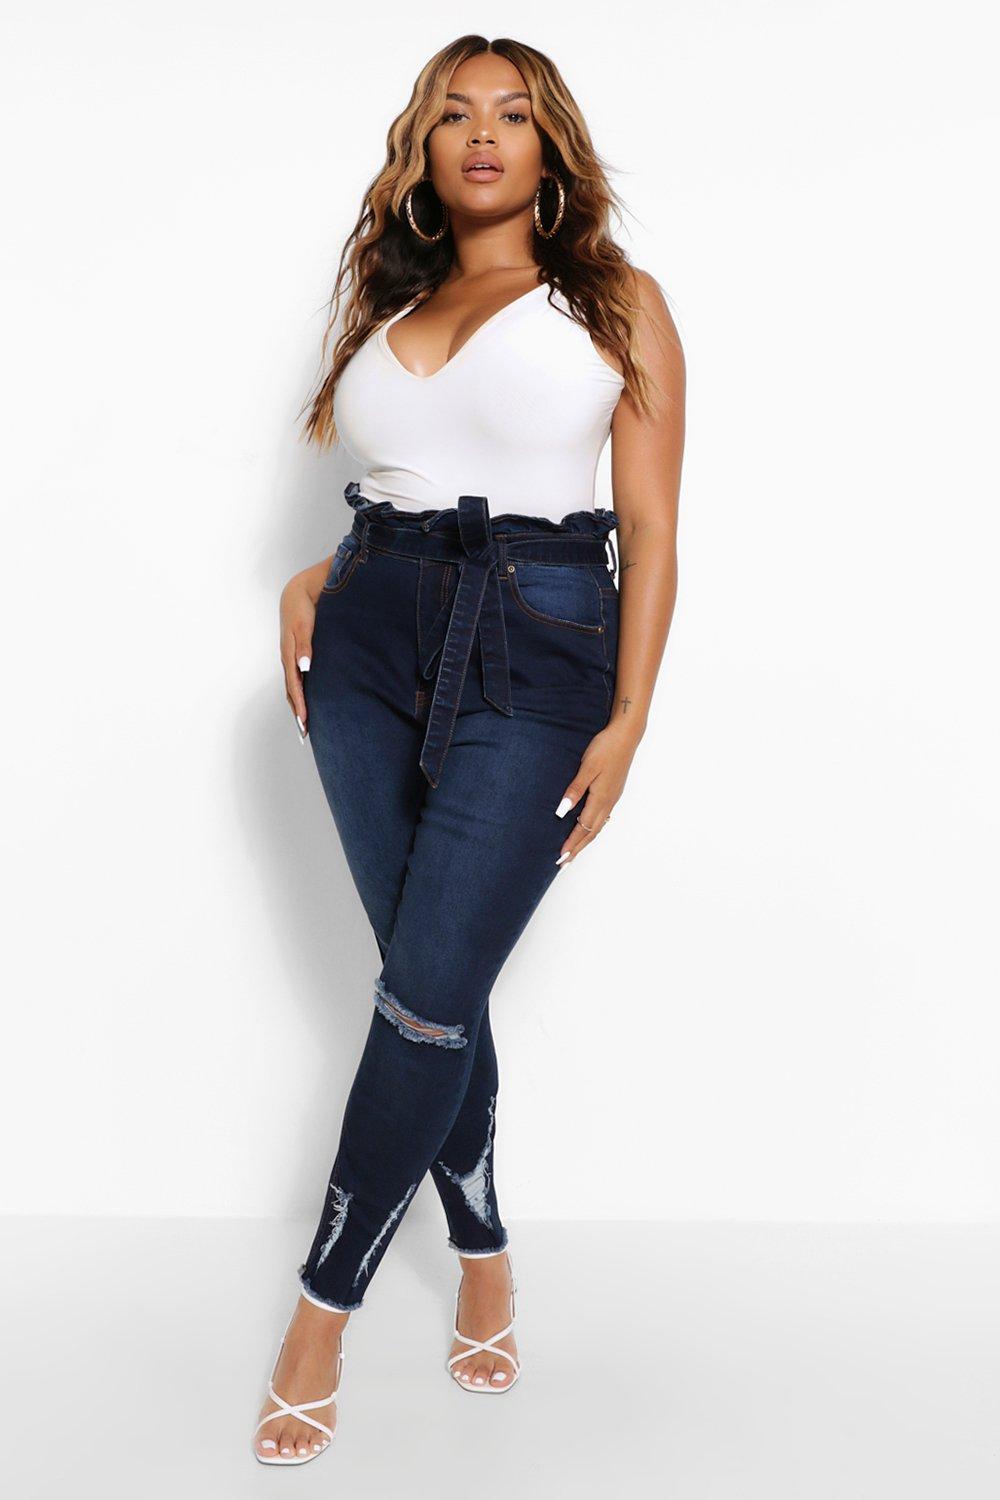 Plus Size Jeans Plus High Waist Belted Distress Skinny Jeans